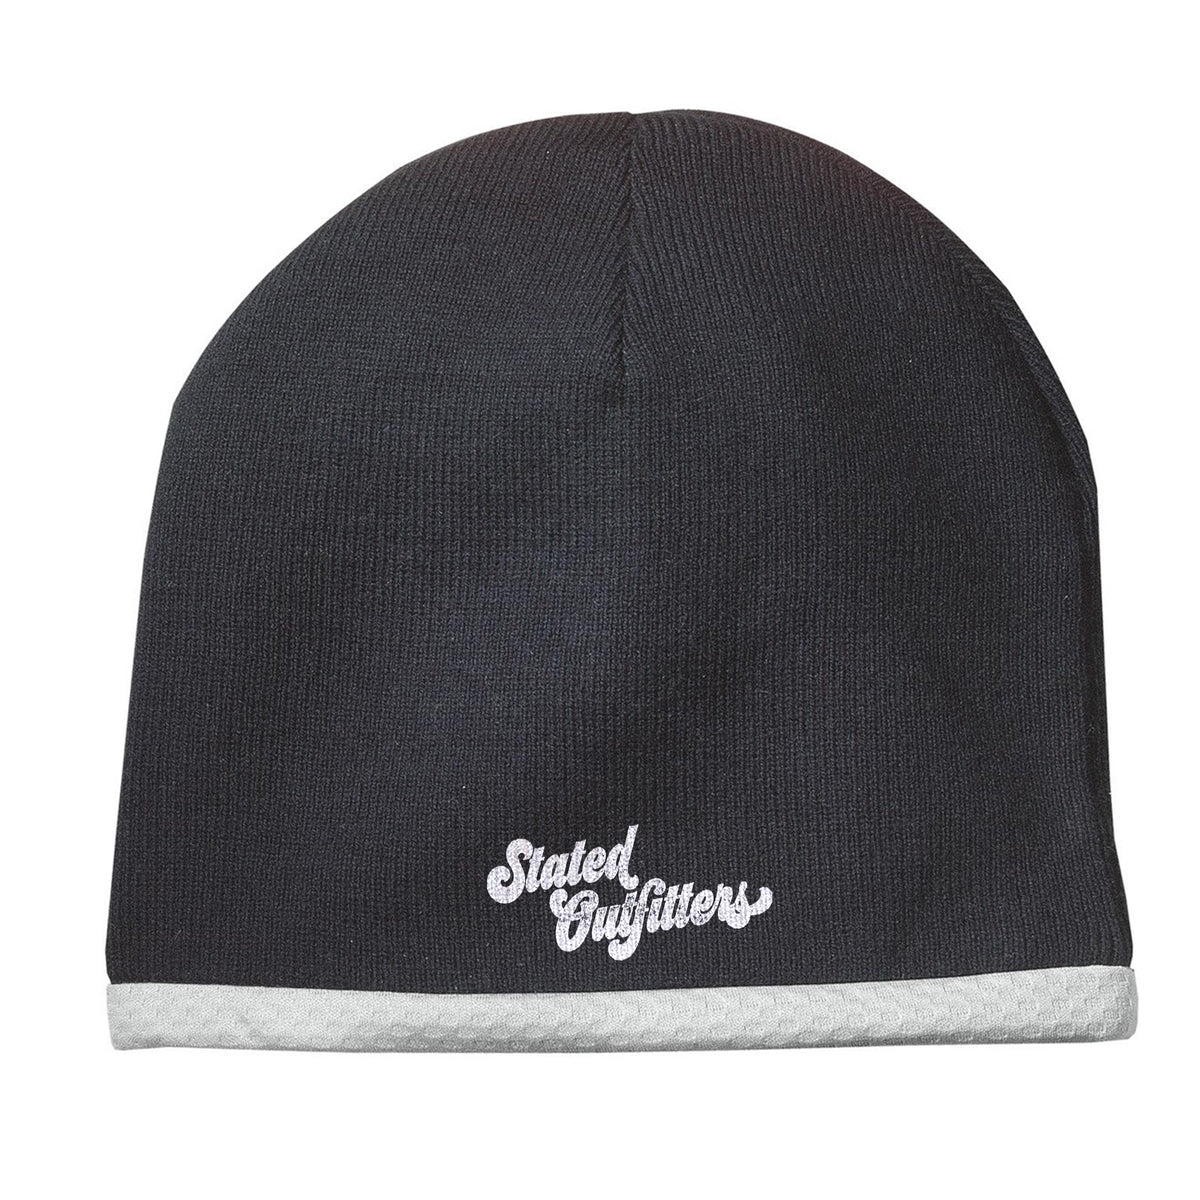 Stated Outfitters Beanie